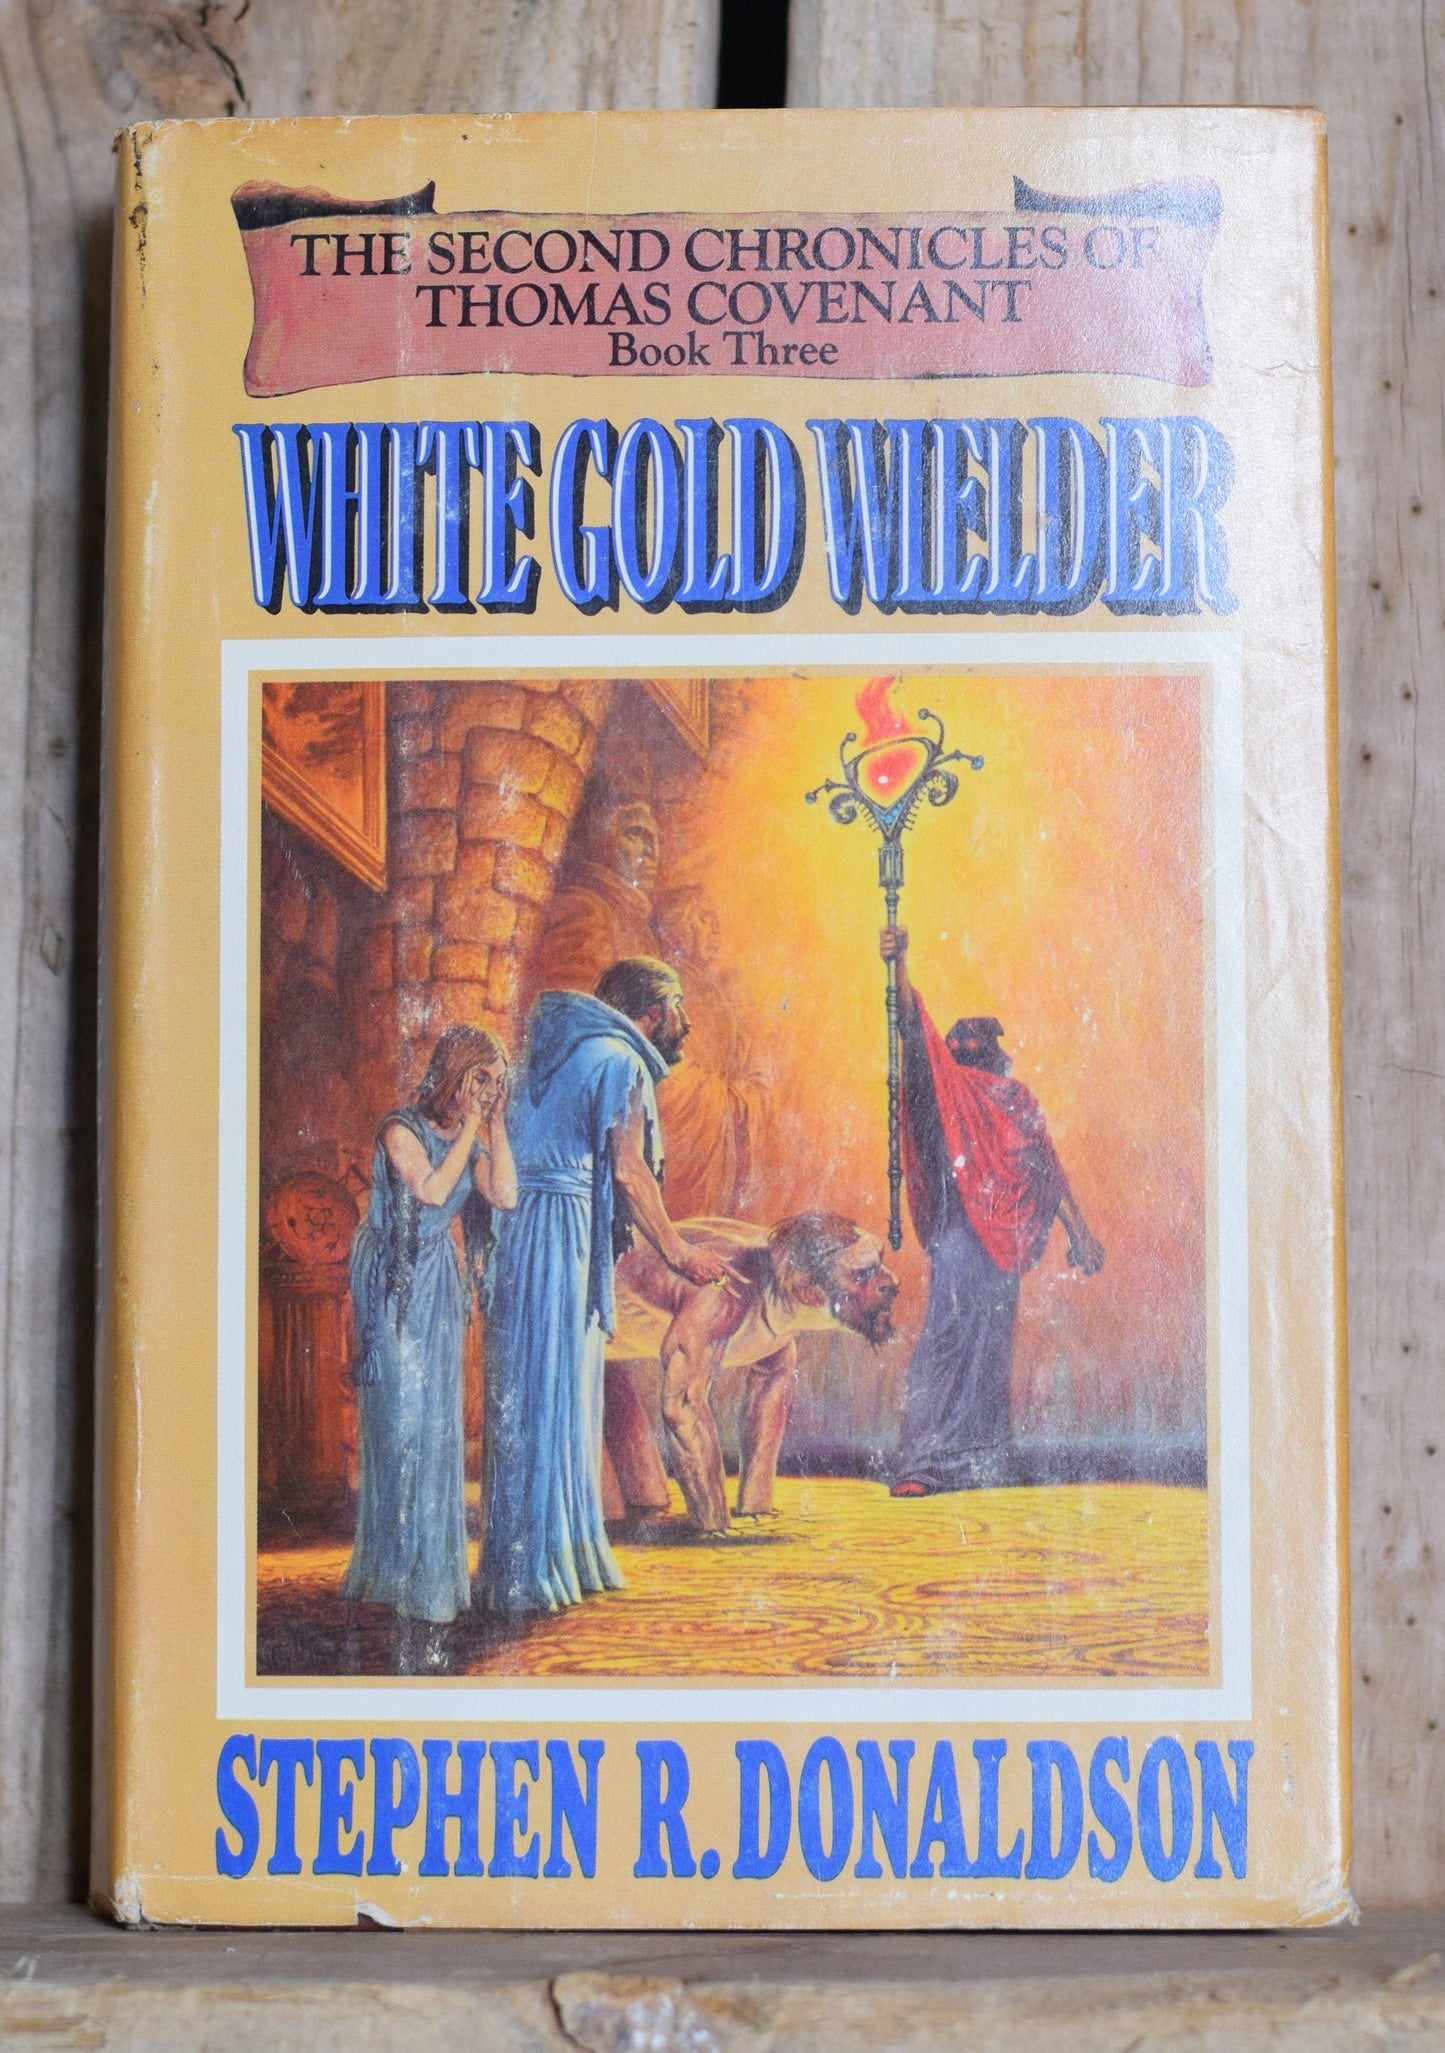 Vintage Sci-fi Hardback Novel: Stephen R Donaldson - The Gold Wielder, Book 3 of The Second Chronicles of Thomas Covenant